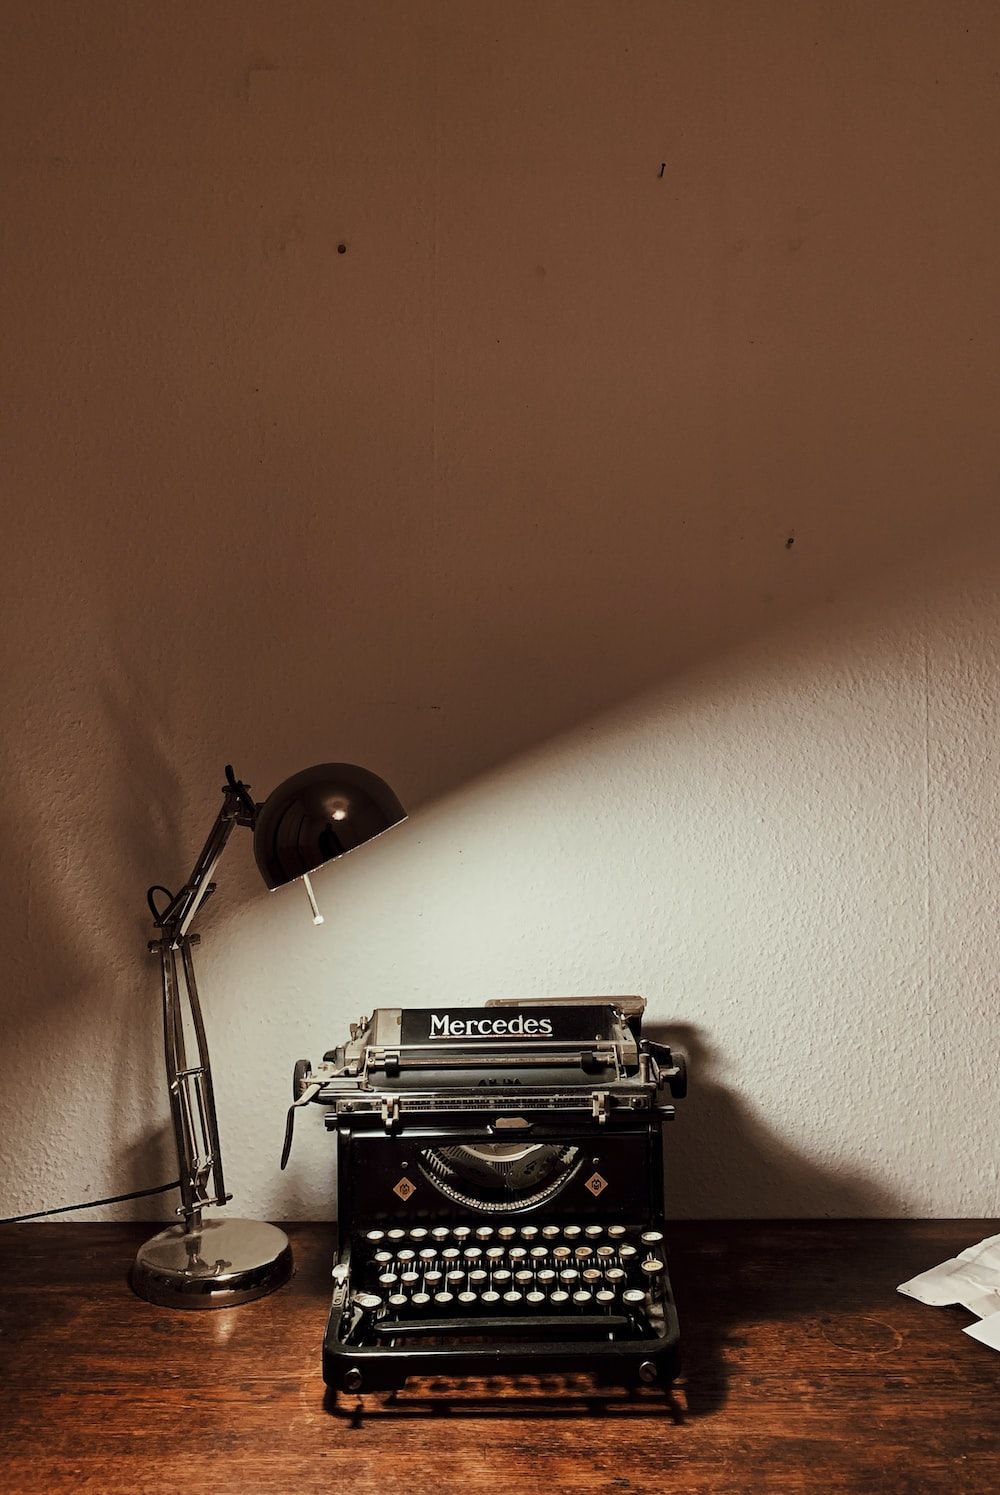 A black typewriter with the word Mercedes on it sits on a wooden table next to a lamp. - Brown, light brown